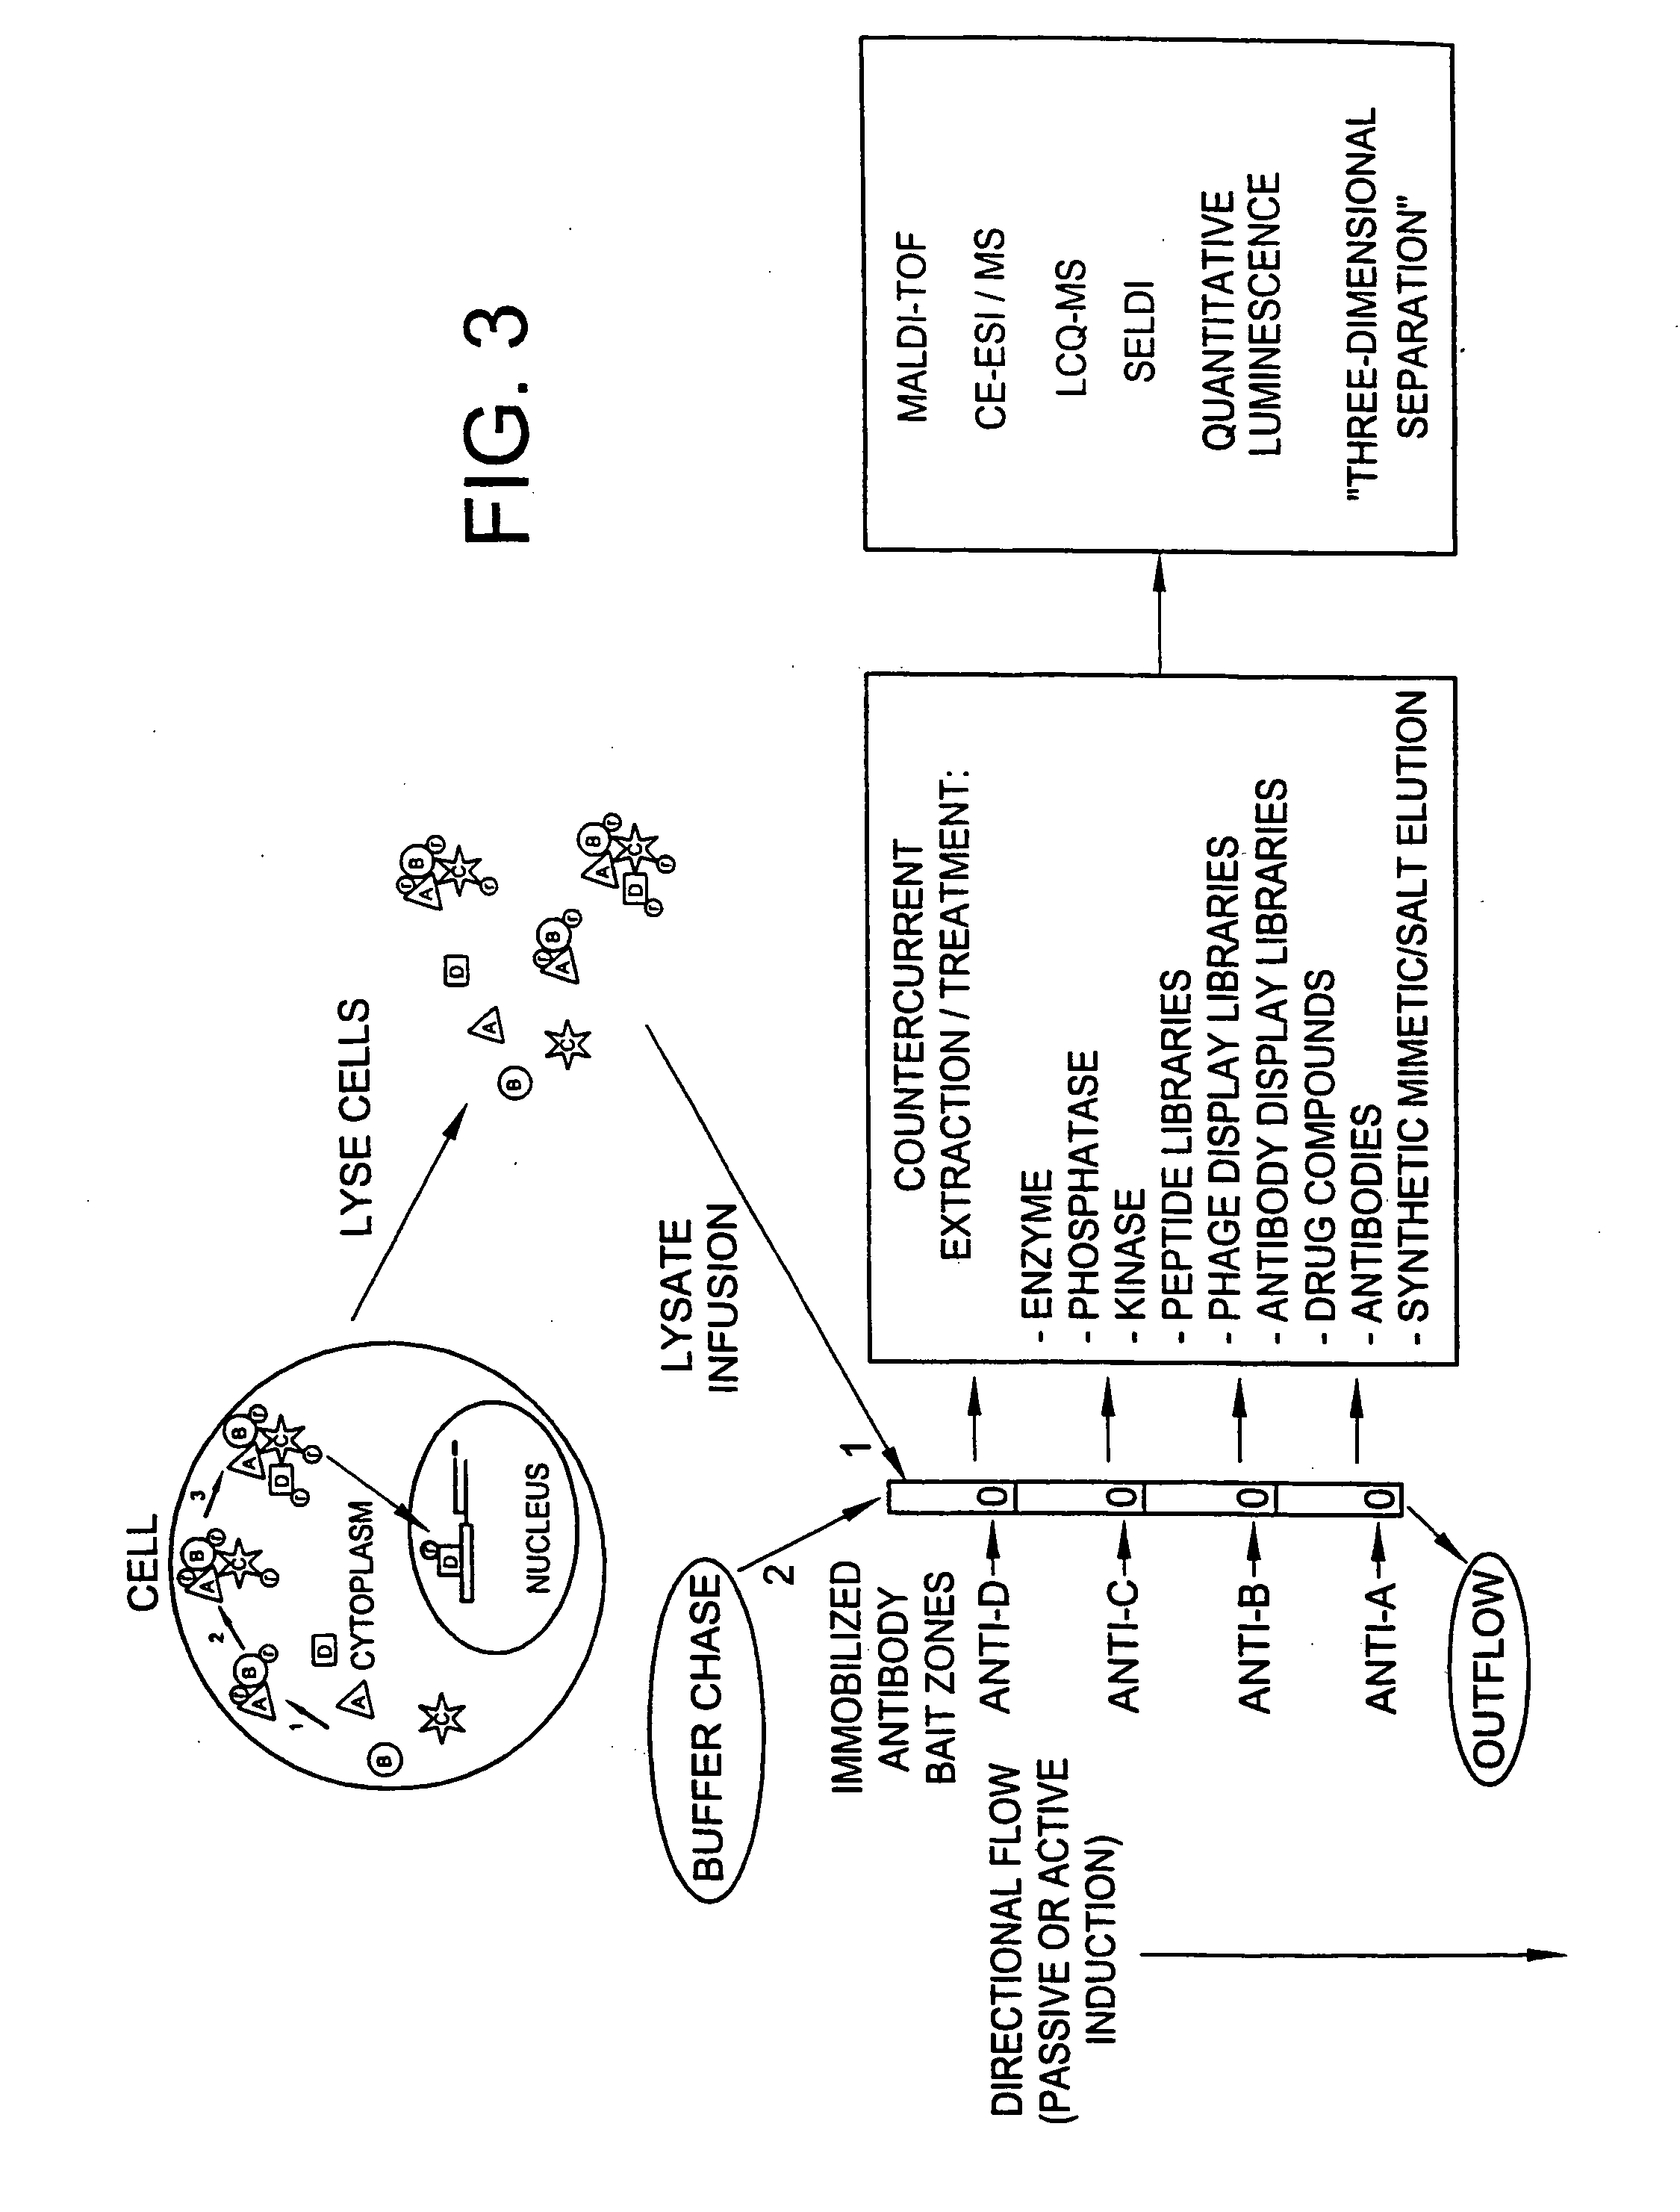 Method and apparatus for signal transduction pathway profiling